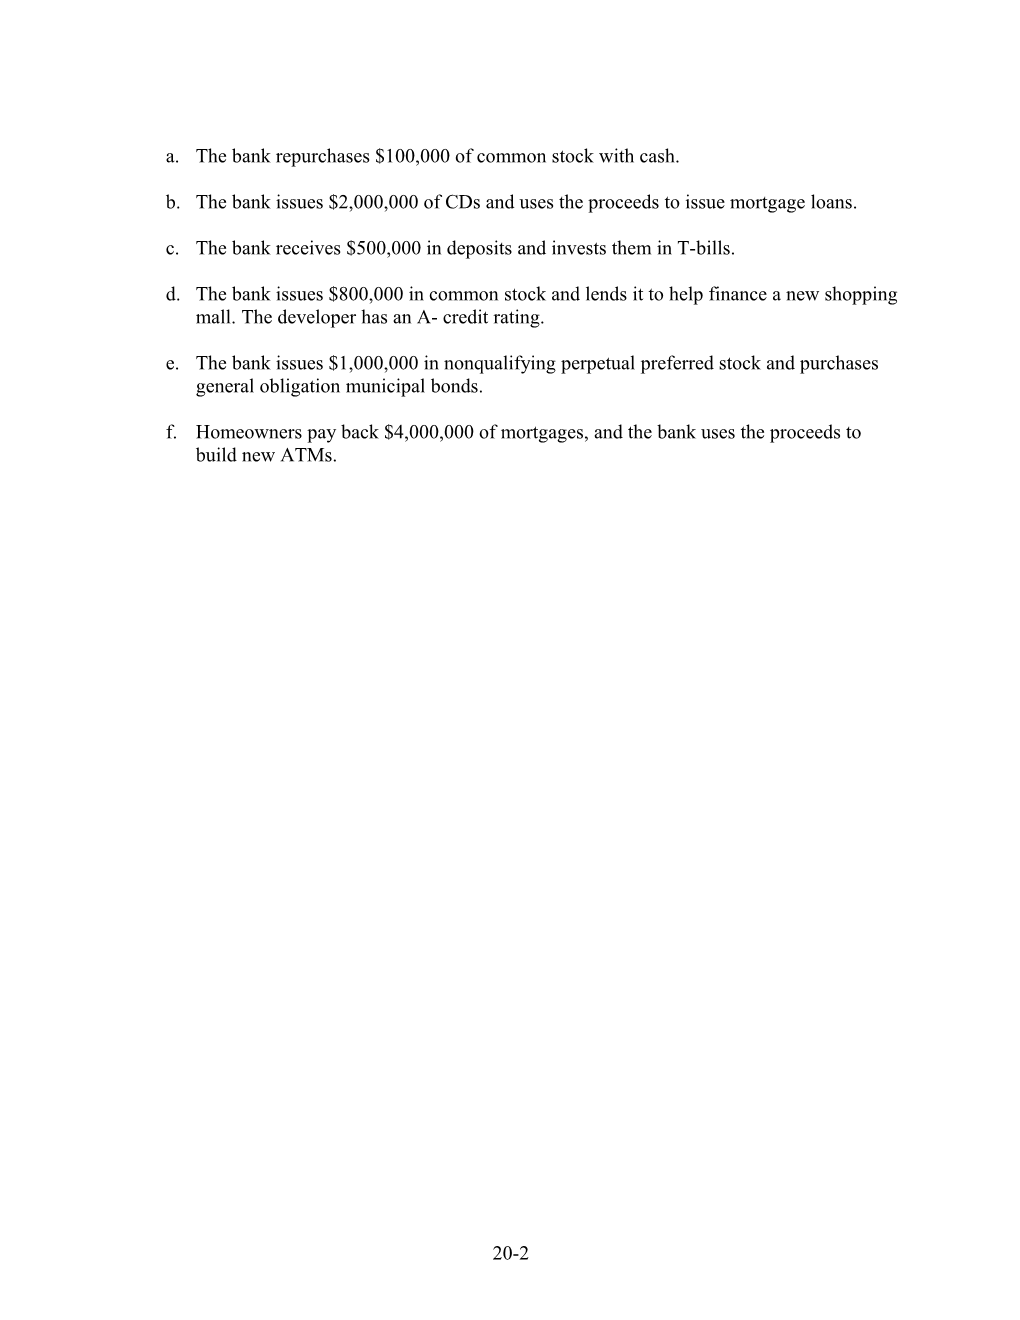 Solutions for End-Of-Chapter Questions and Problems: Chapter Twenty